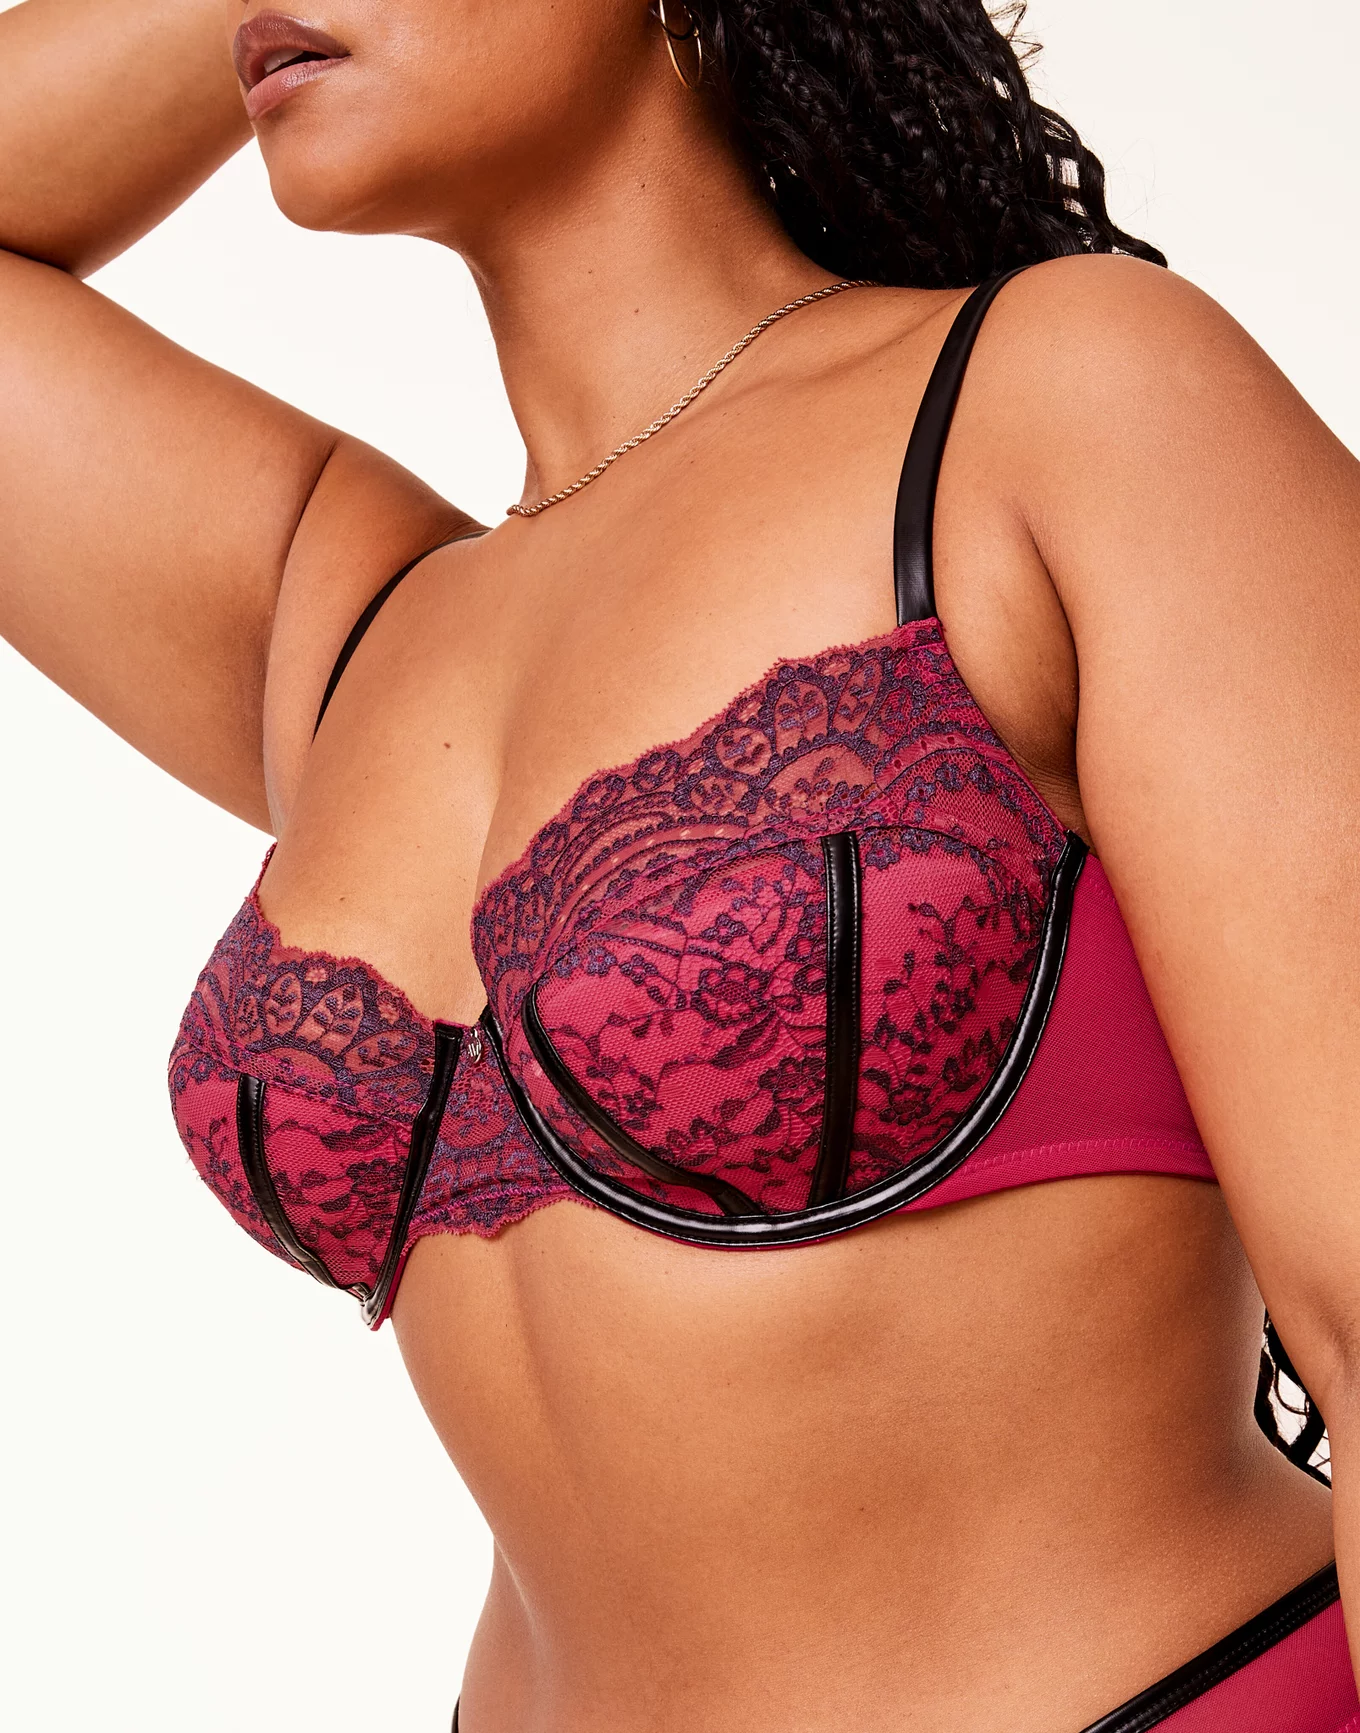 Adore Me Coral Peach Lace Accent Smooth Bra 38D Size undefined - $22 New  With Tags - From W